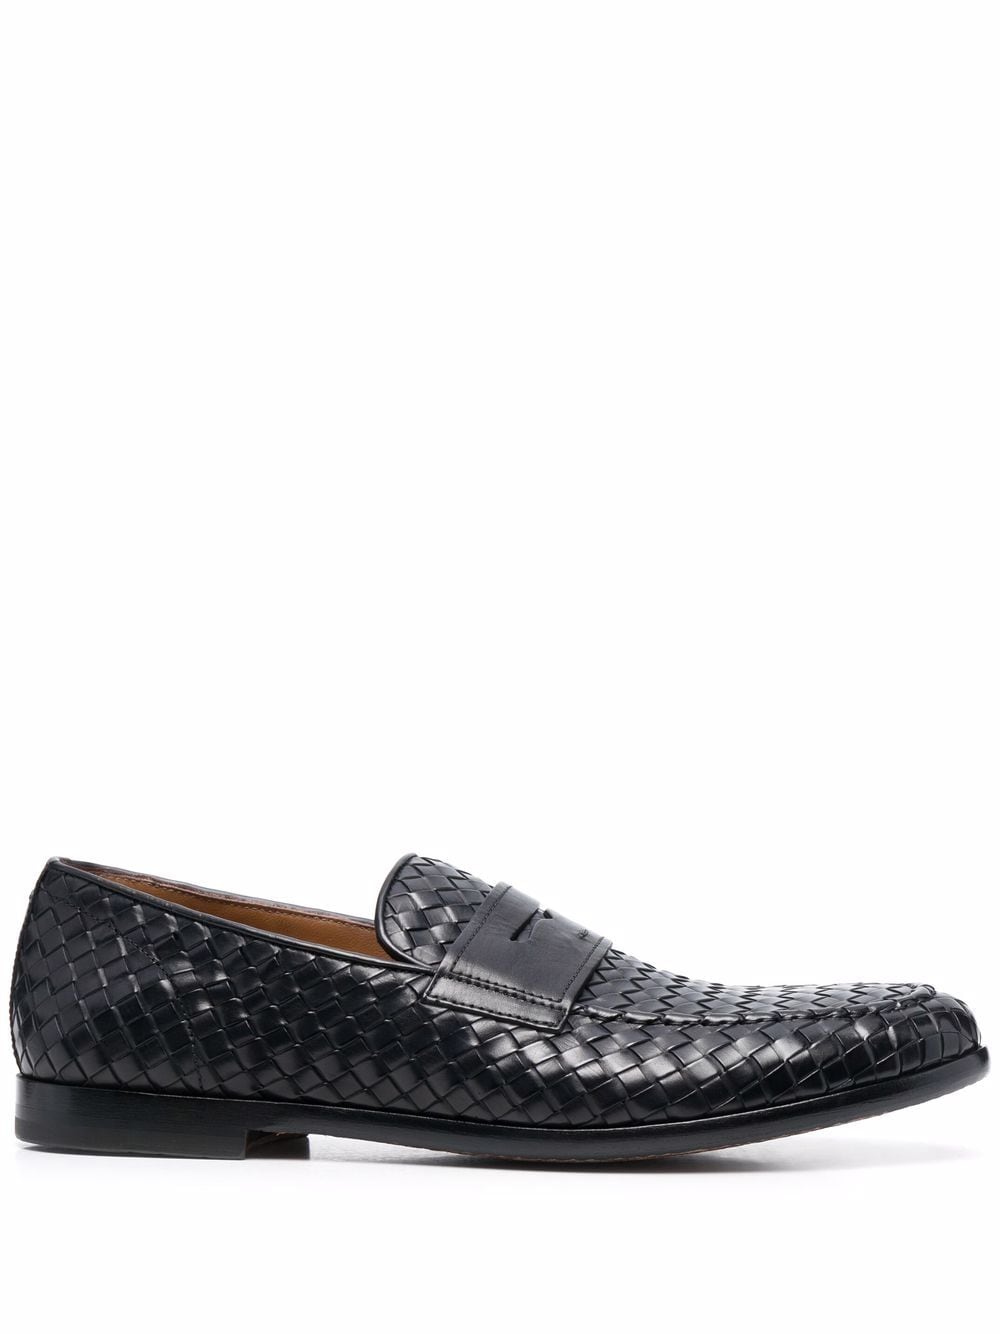 Doucal's woven leather loafers - Blue von Doucal's